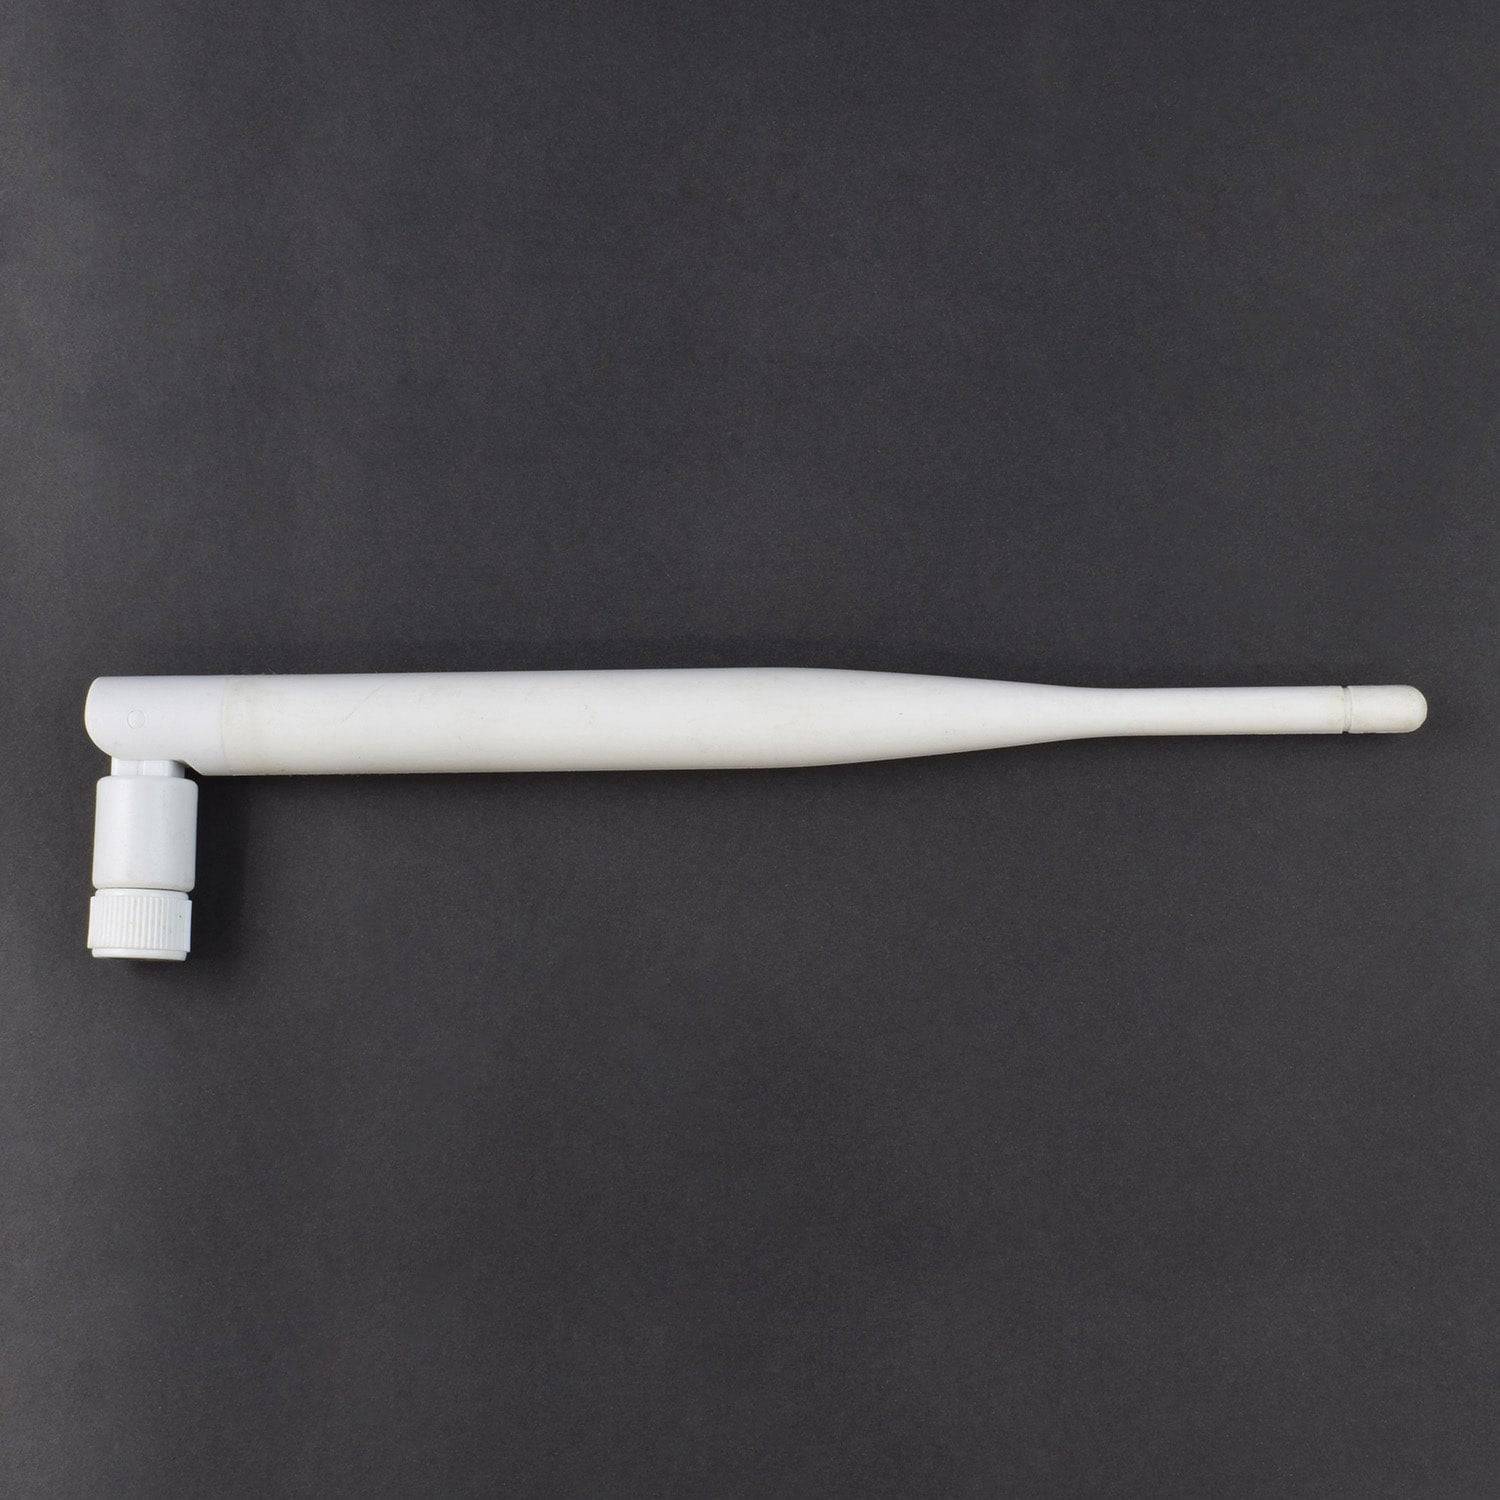 2.4GHz 3.2dBi RP-SMA Omni Antenna for WiFi -RS032 - REES52